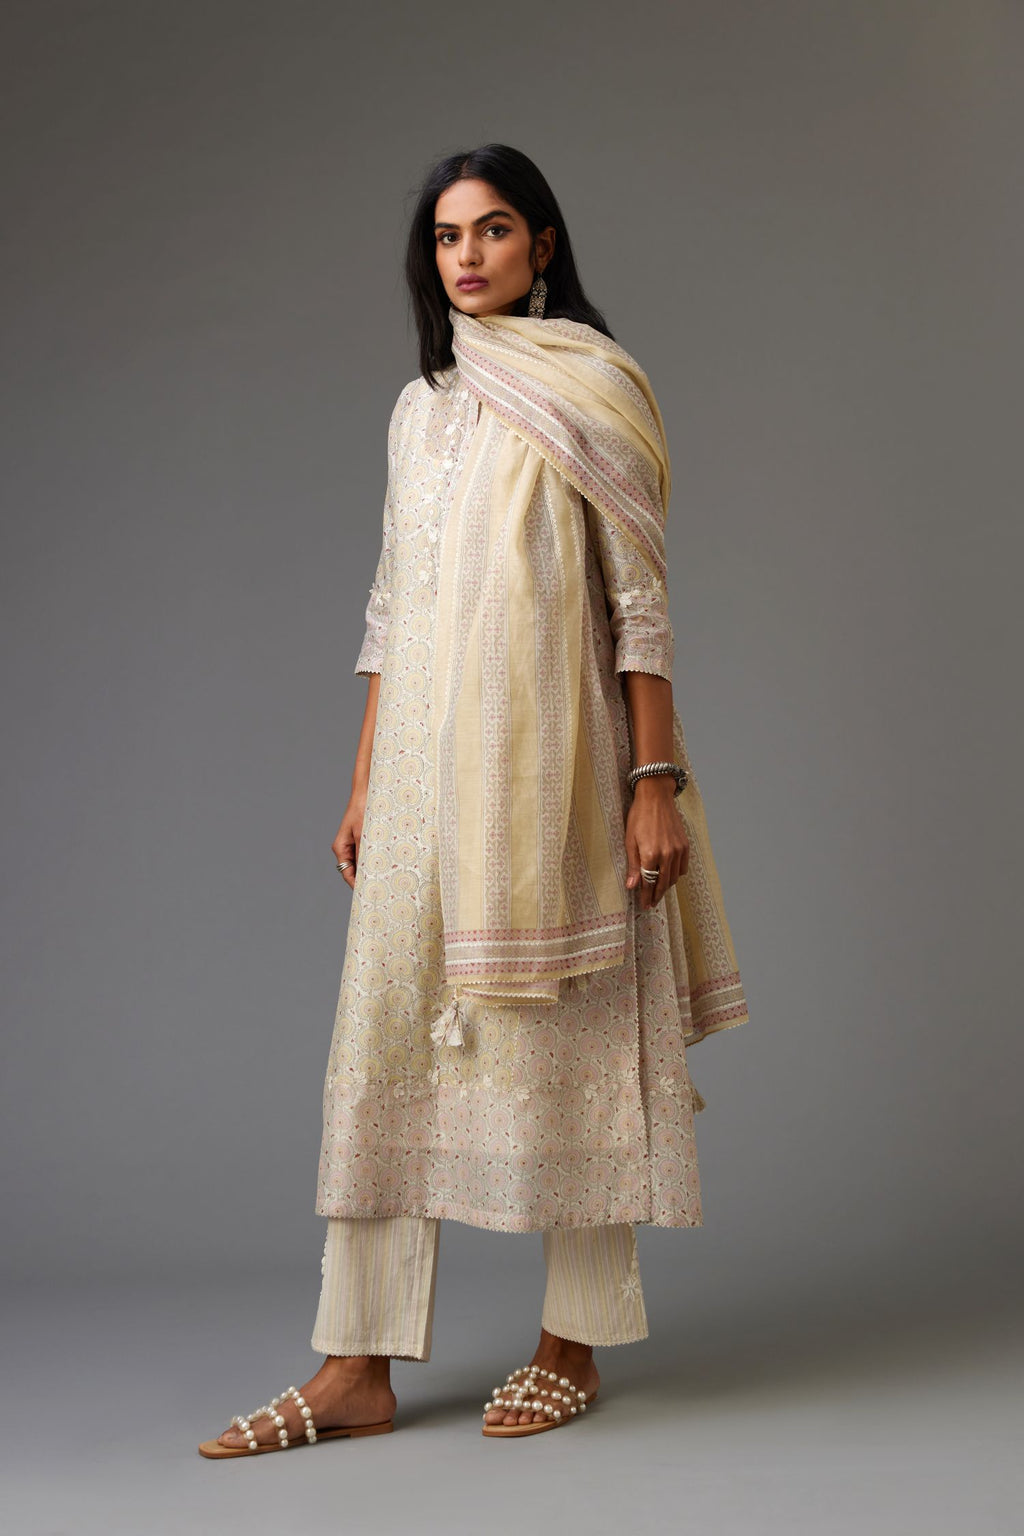 Multicolored mixed print hand-block printed straight kurta set with thread embroidery and chiffon flower buds at edges, highlighted with ric-rac lace.